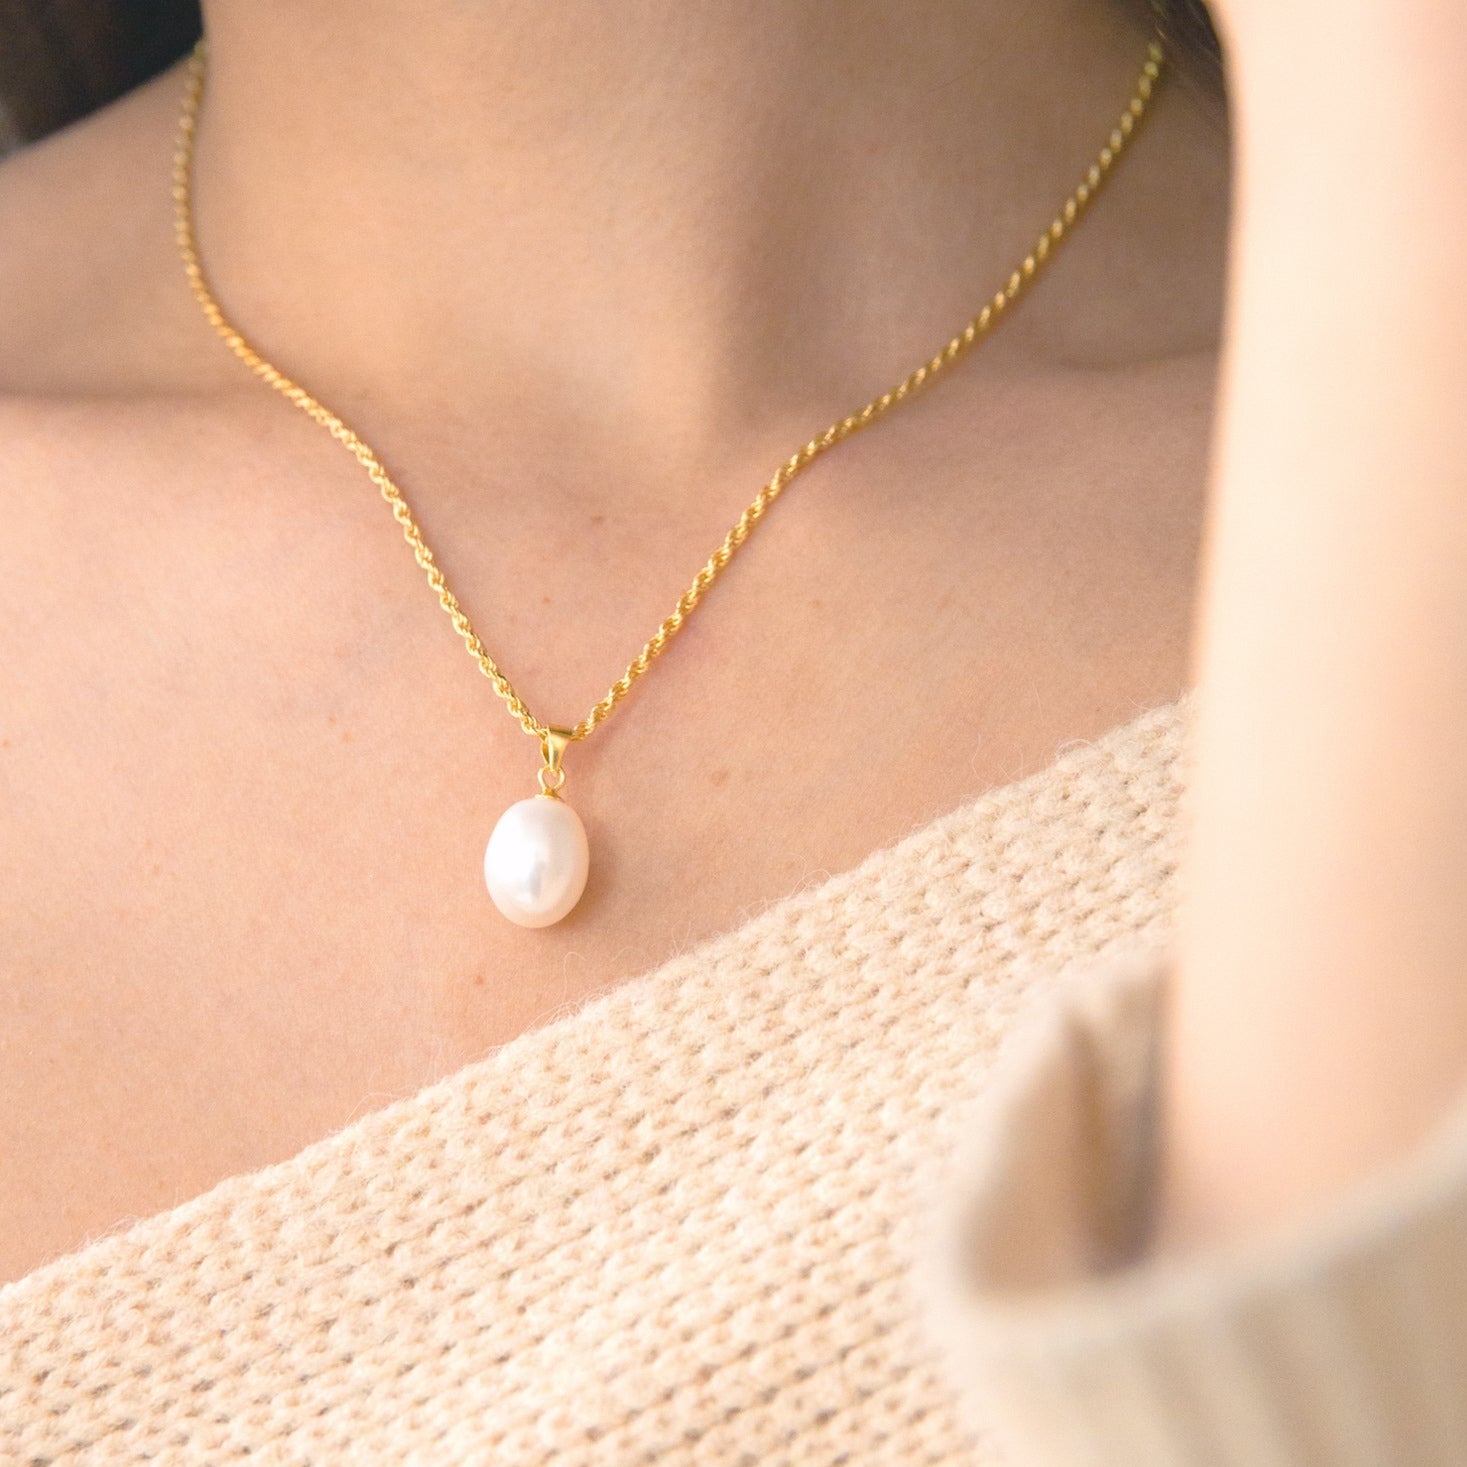 Diana Gold Vermeil Pearl Droplet Necklace – Victoria Emerson